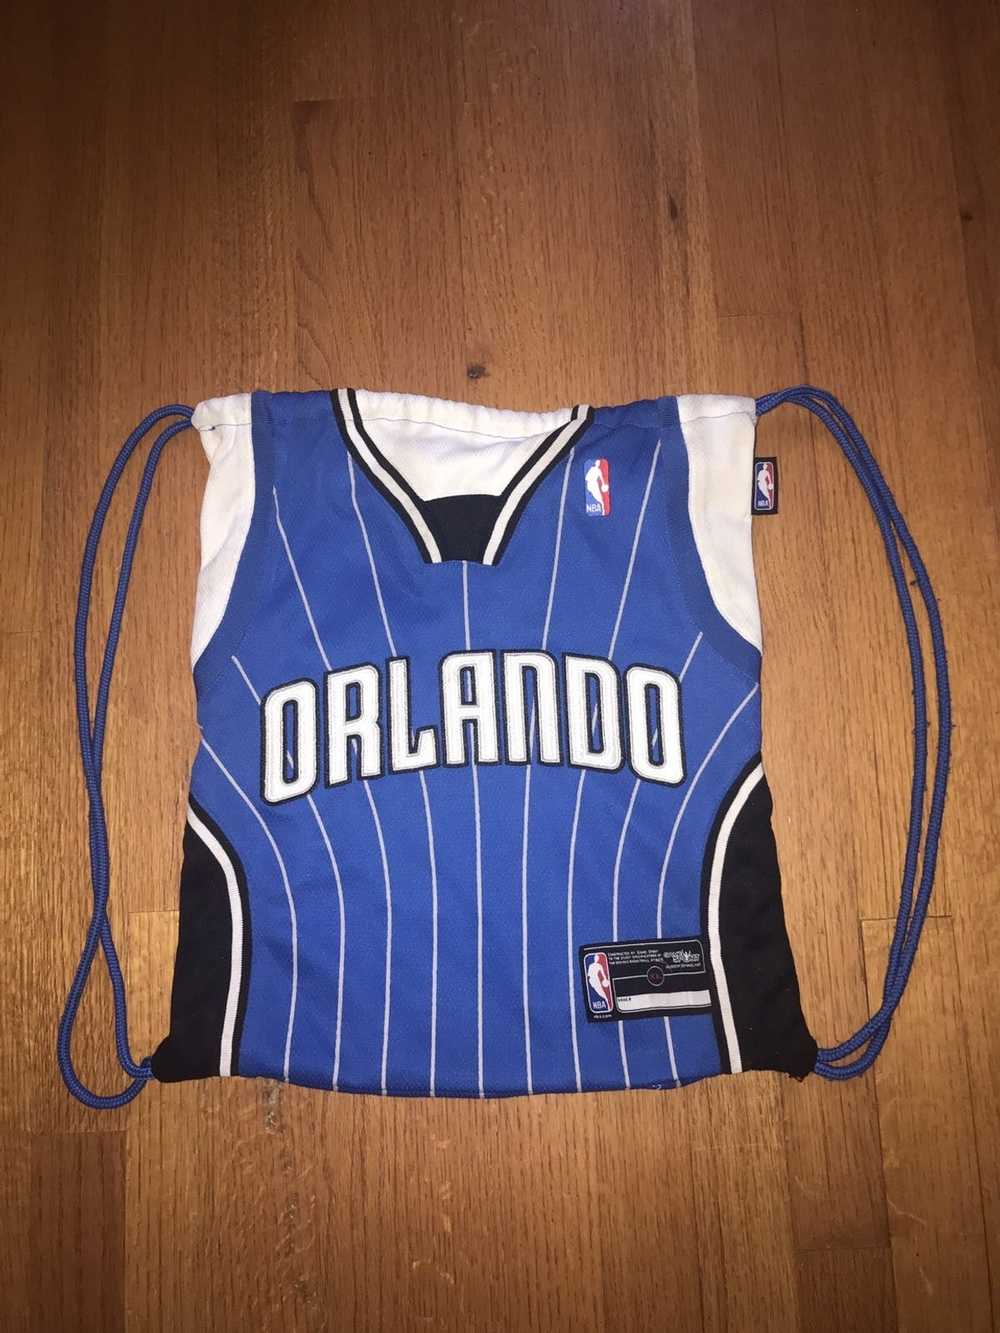 THROW US BACK - Orlando Magic Outfit🔥😍Share this picture if you